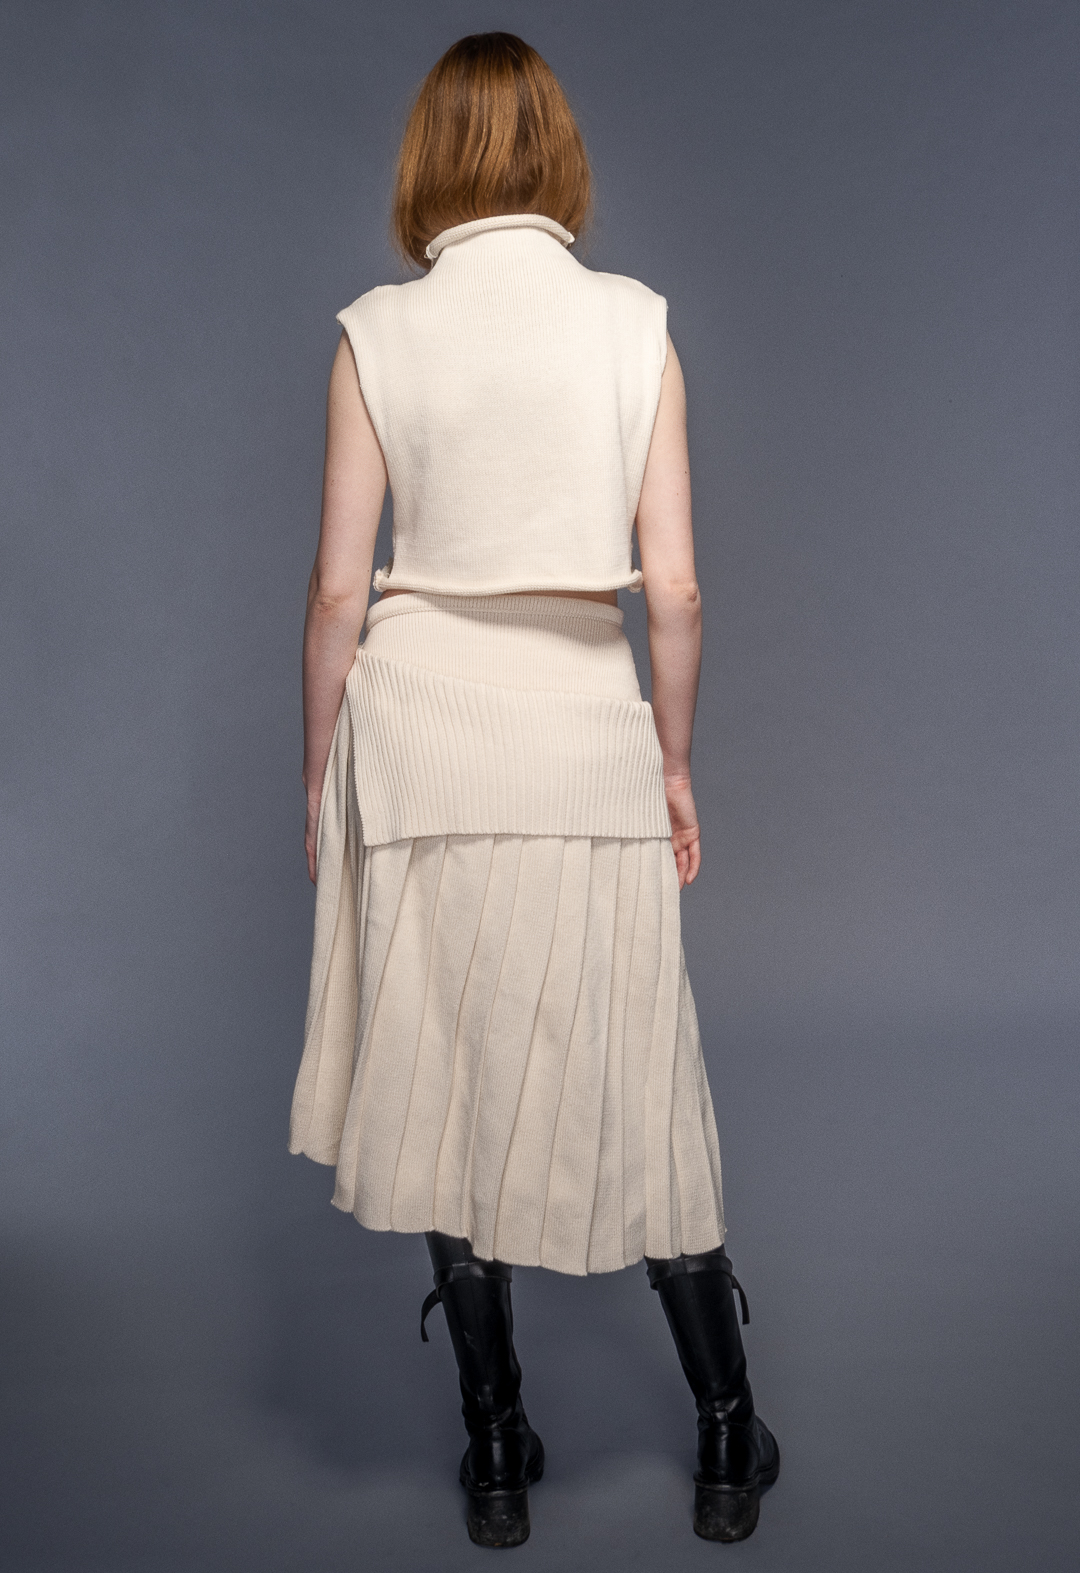 Model wears funnel neck top with misshaped intarsia and irregular pleated skirt in organic cotton. Her hair is tucked in the sweater.